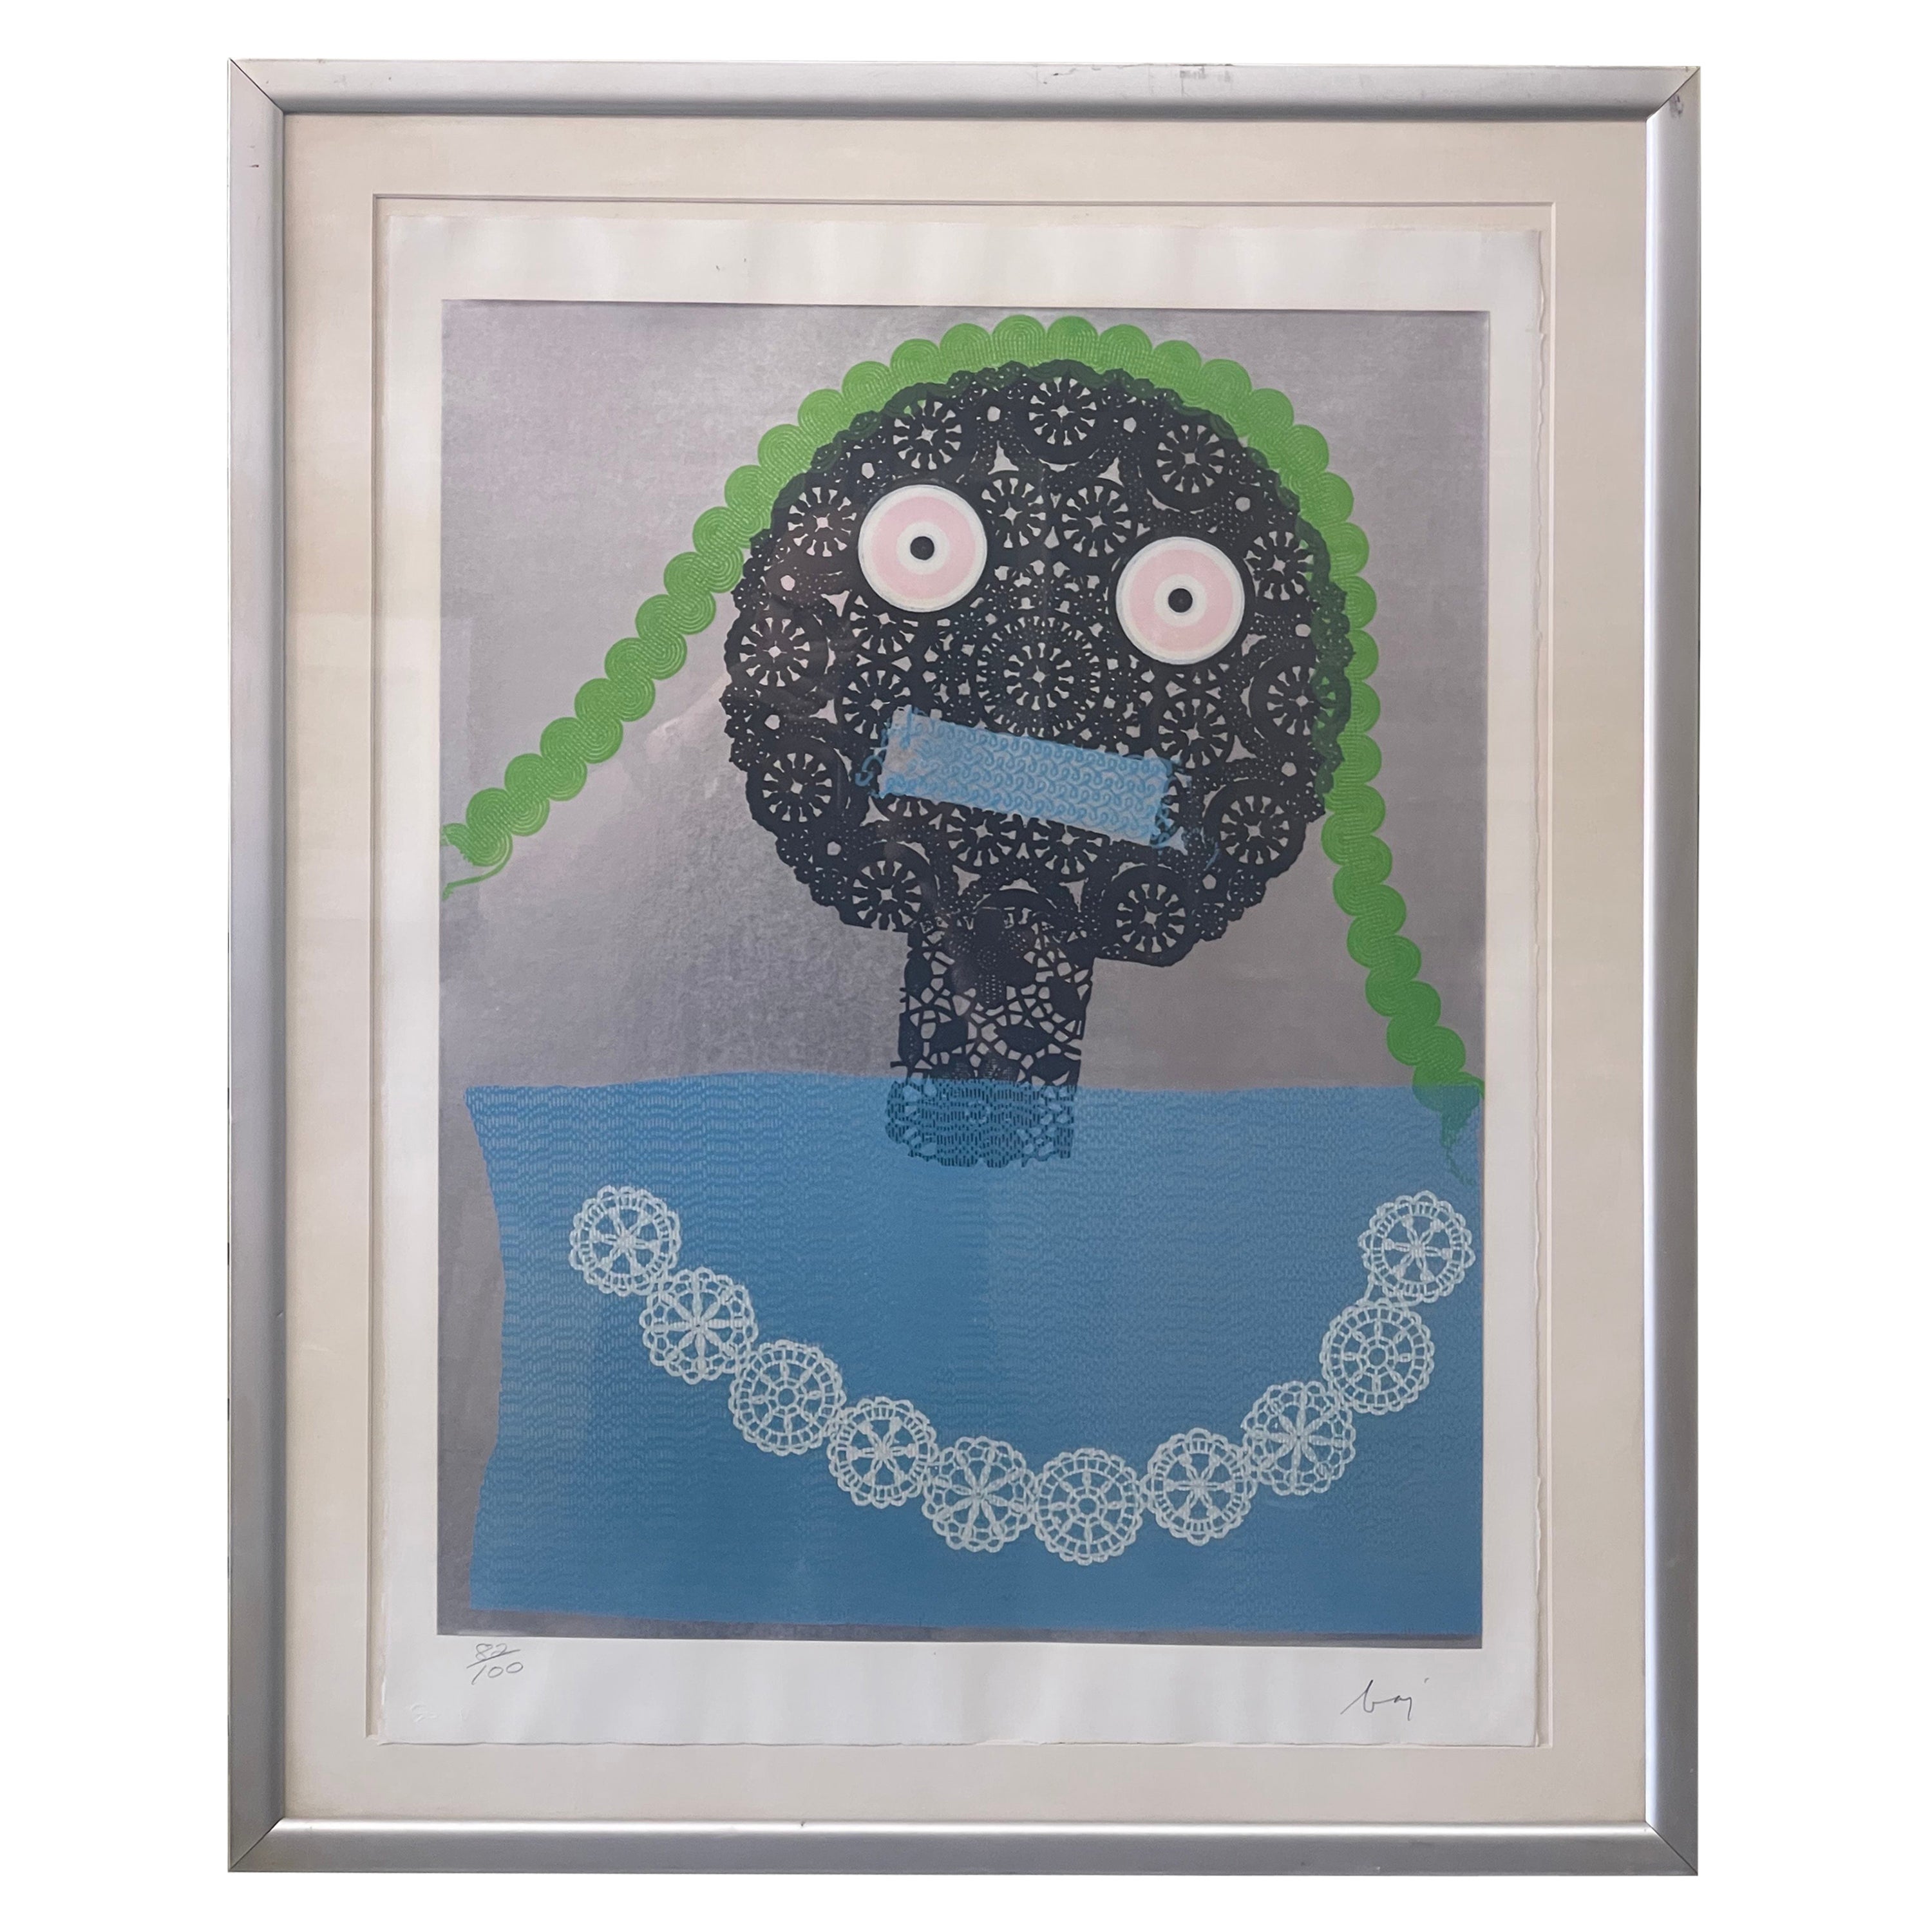 Limited Edition Mixed Media Lithograph "Doily Girl" by Enrico Baj For Sale